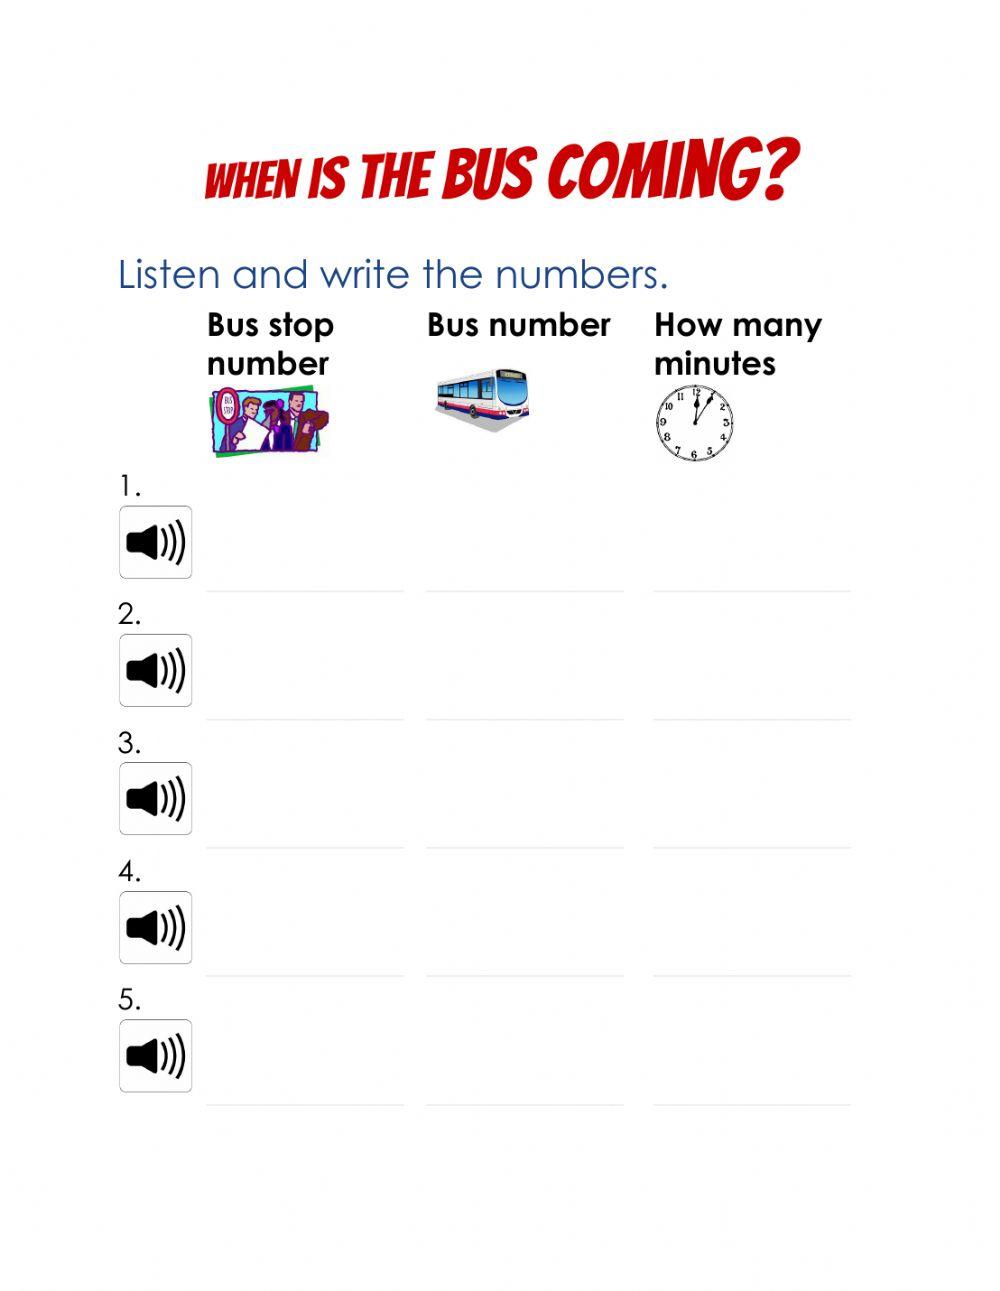 When is the bus coming?